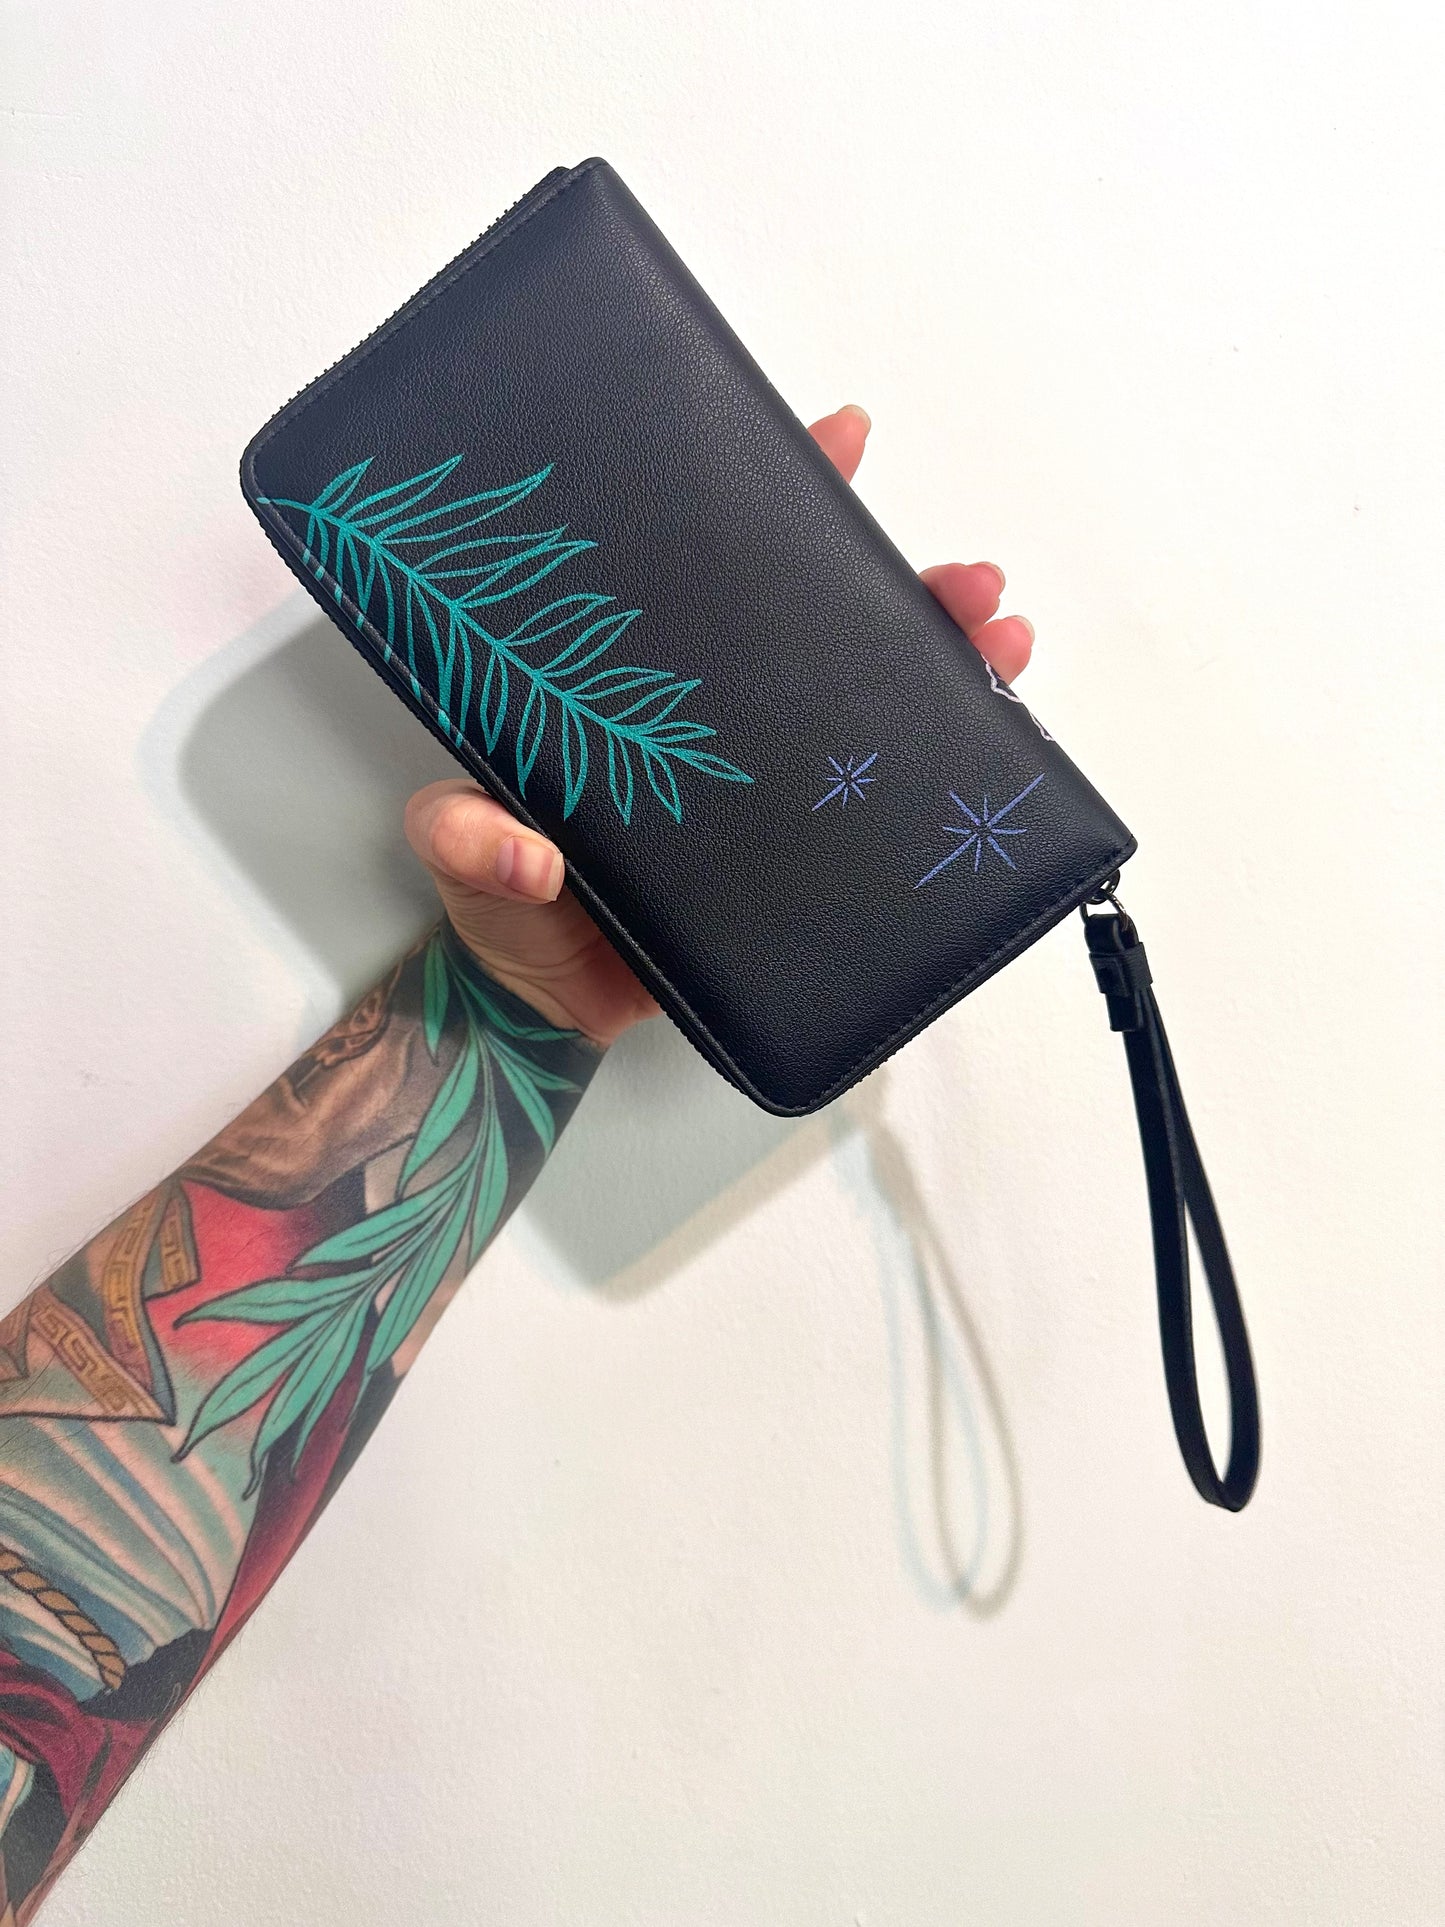 HAND PAINTED Floral Clutch